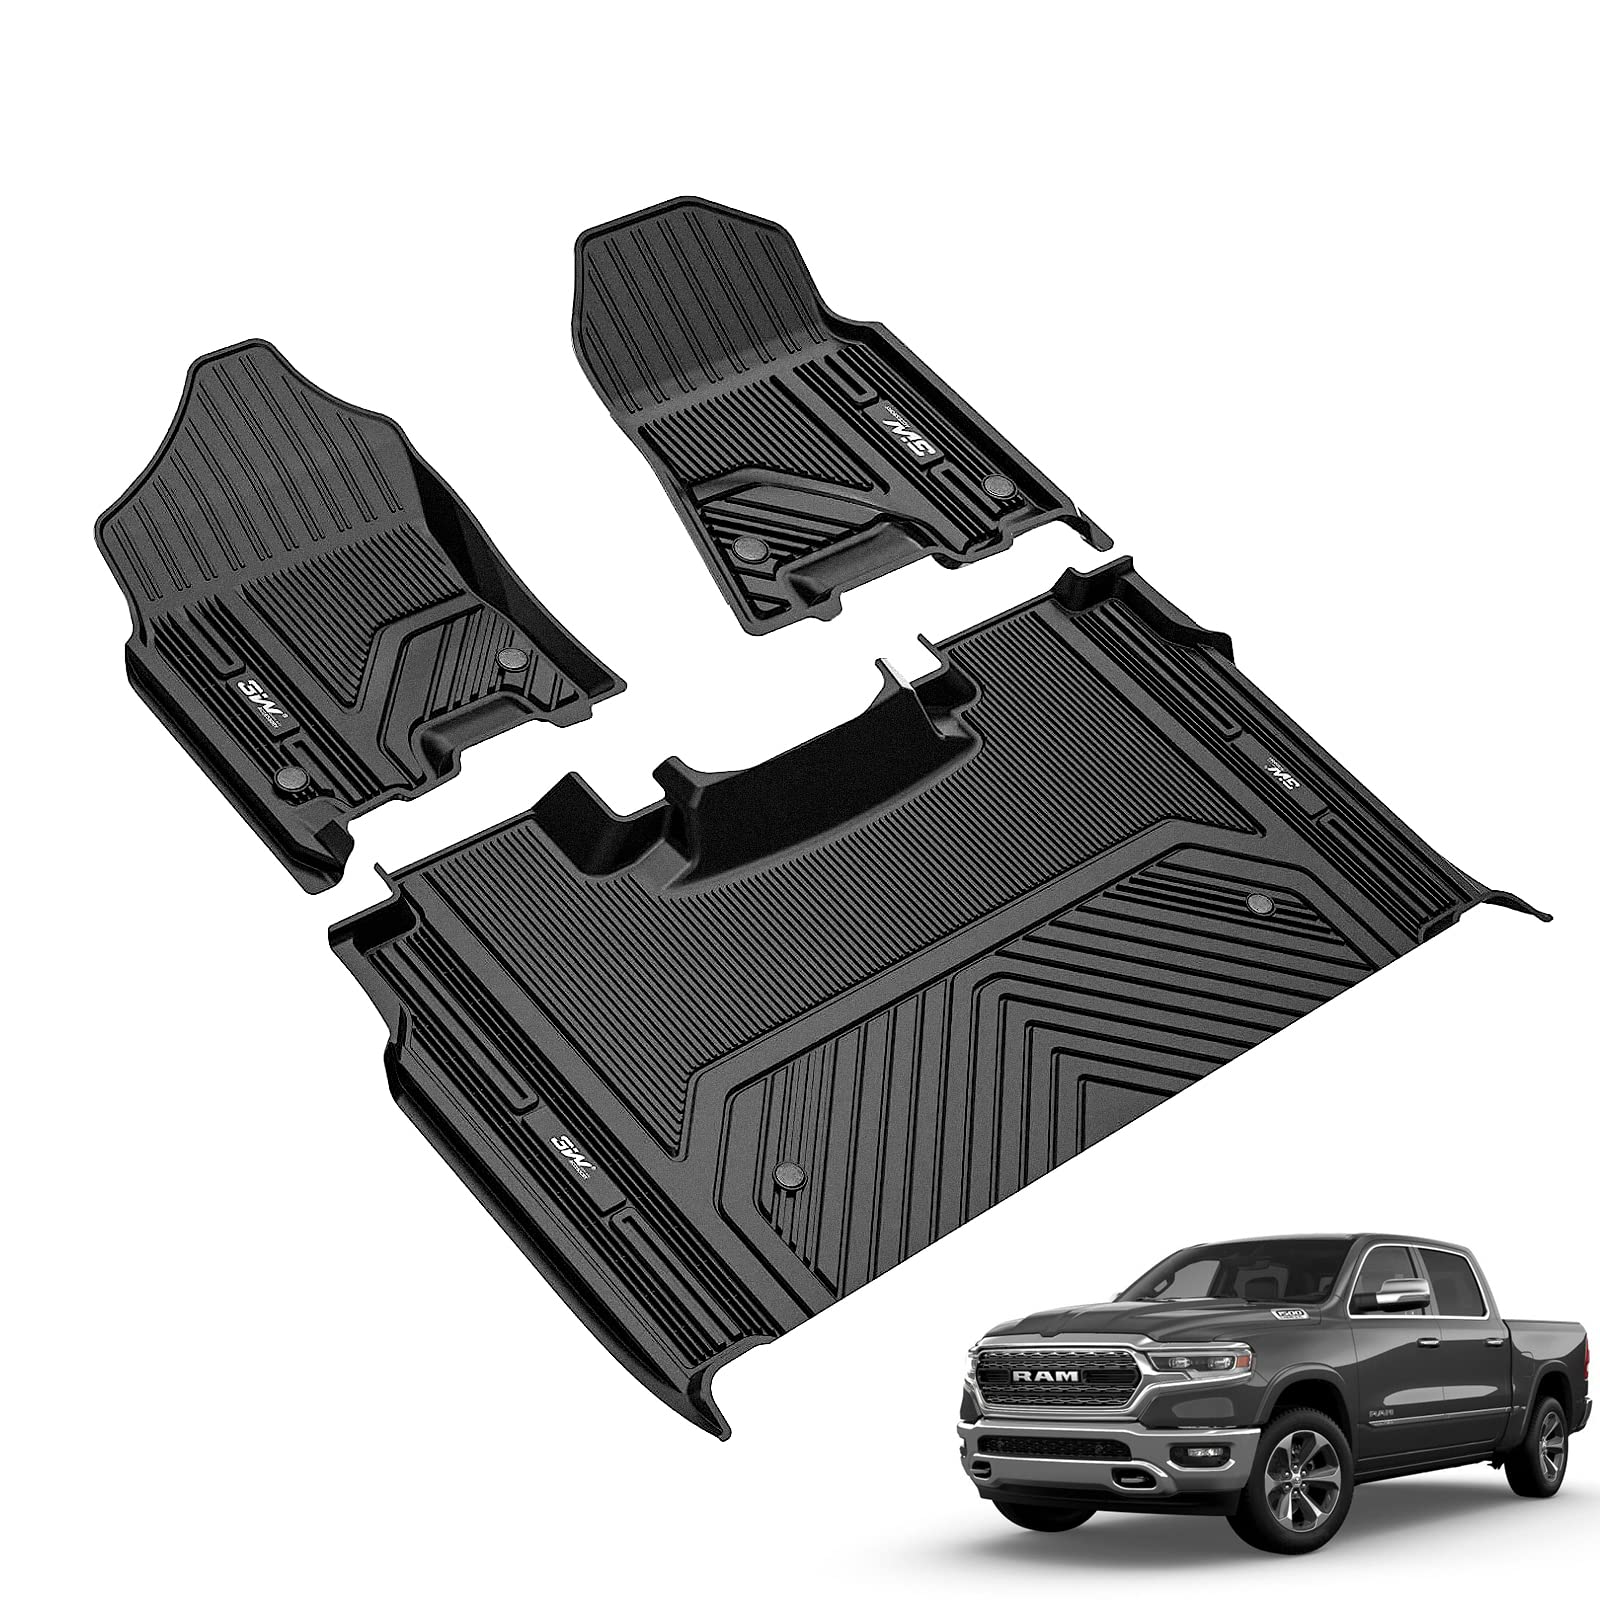 3W Dodge Ram 1500 2019-2023 (Not Quad cab) Without Storage Custom Floor Mats TPE Material & All-Weather Protection Vehicles & Parts 3Wliners 2019-2023 Ram 1500 2019-2023  With Underseat Storage 1st&2nd Row Mats